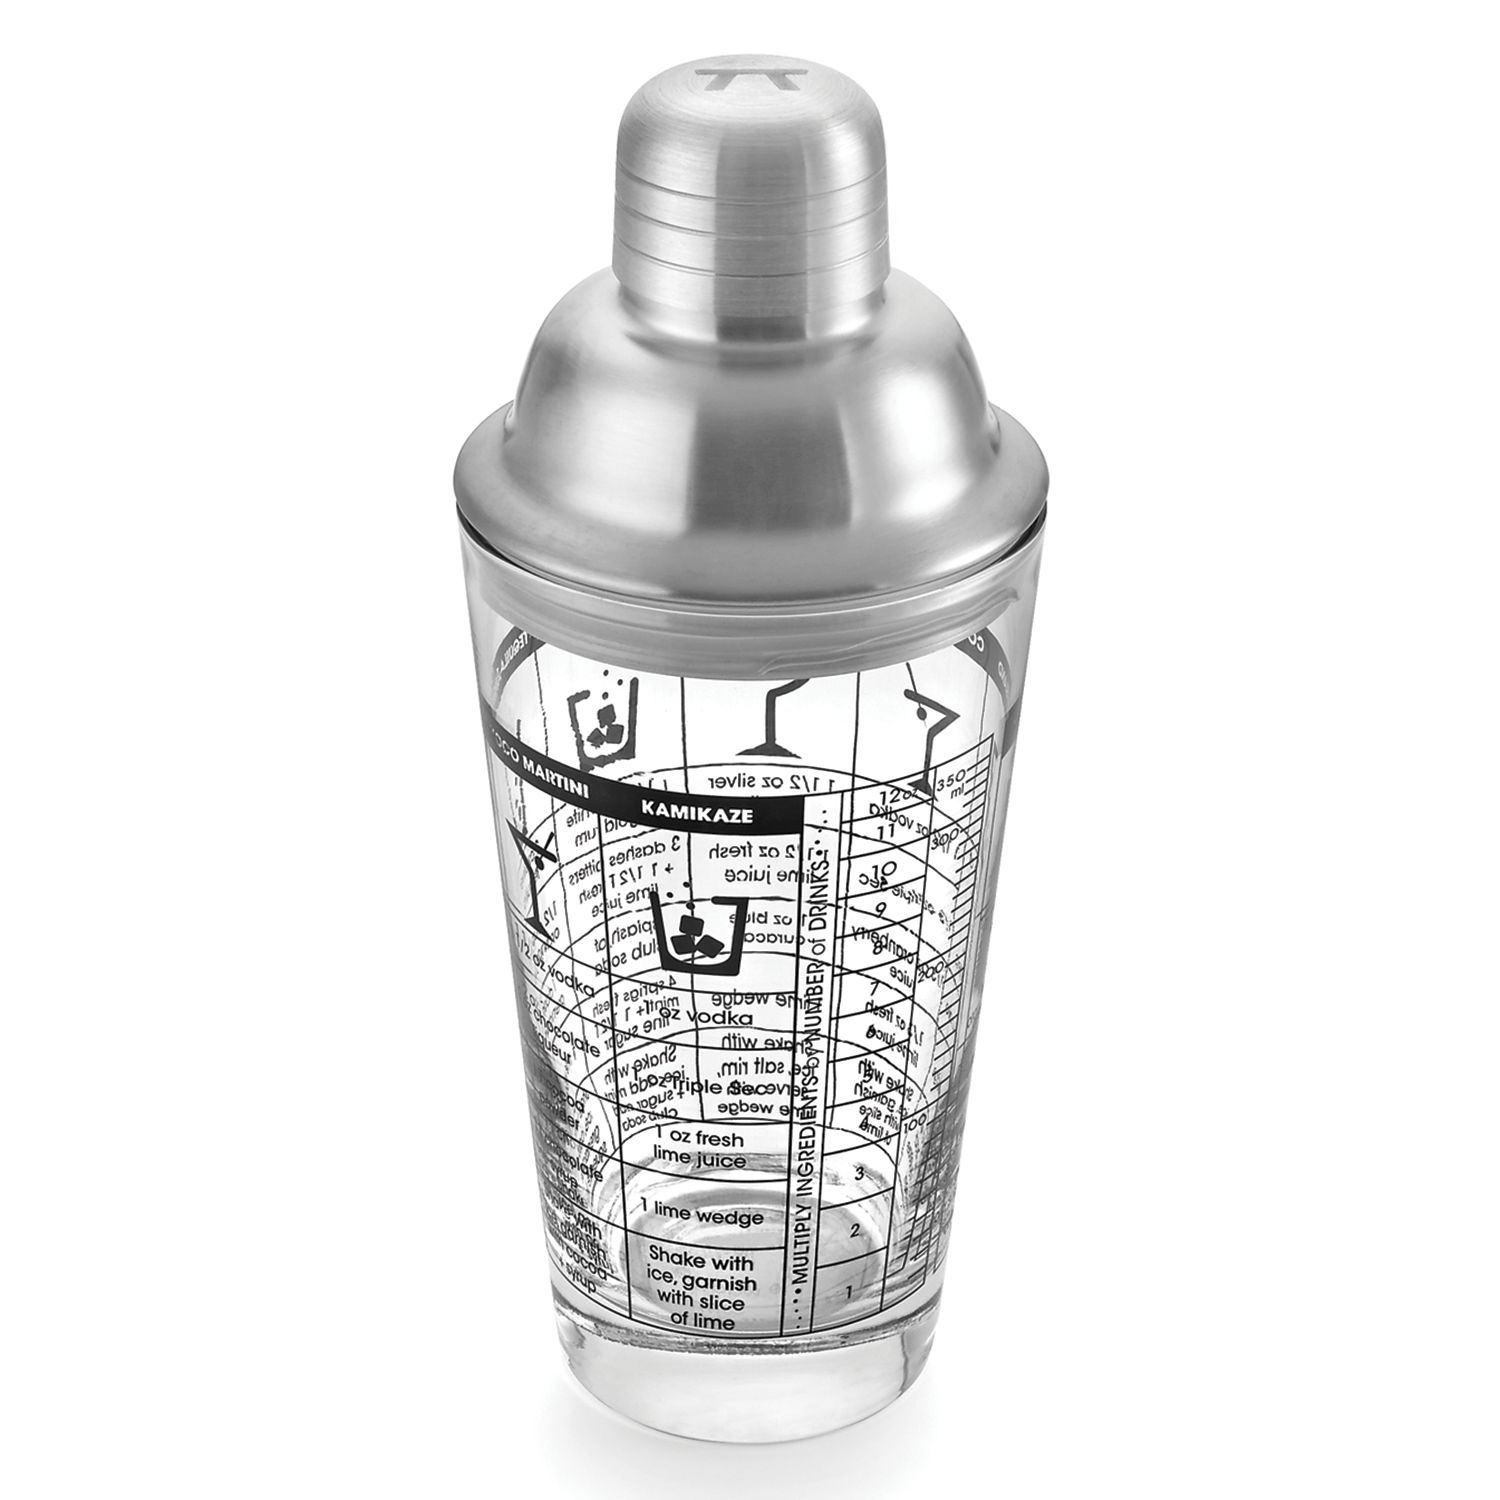 KSP Mixy Cocktail Shaker - Set of 5 (Stainless Steel)